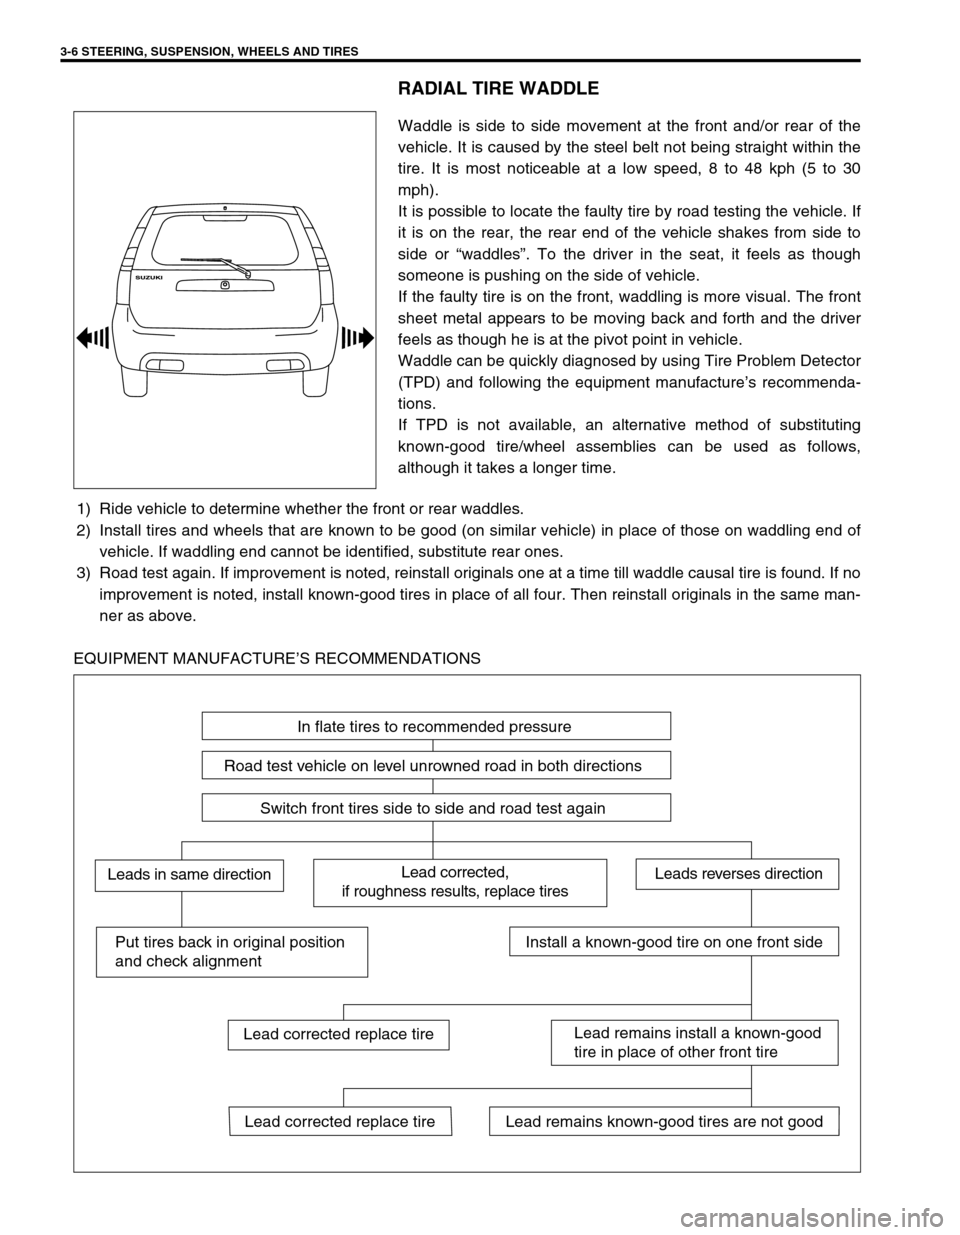 SUZUKI SWIFT 2000 1.G RG413 Service Workshop Manual 3-6 STEERING, SUSPENSION, WHEELS AND TIRES
RADIAL TIRE WADDLE
Waddle is side to side movement at the front and/or rear of the
vehicle. It is caused by the steel belt not being straight within the
tire